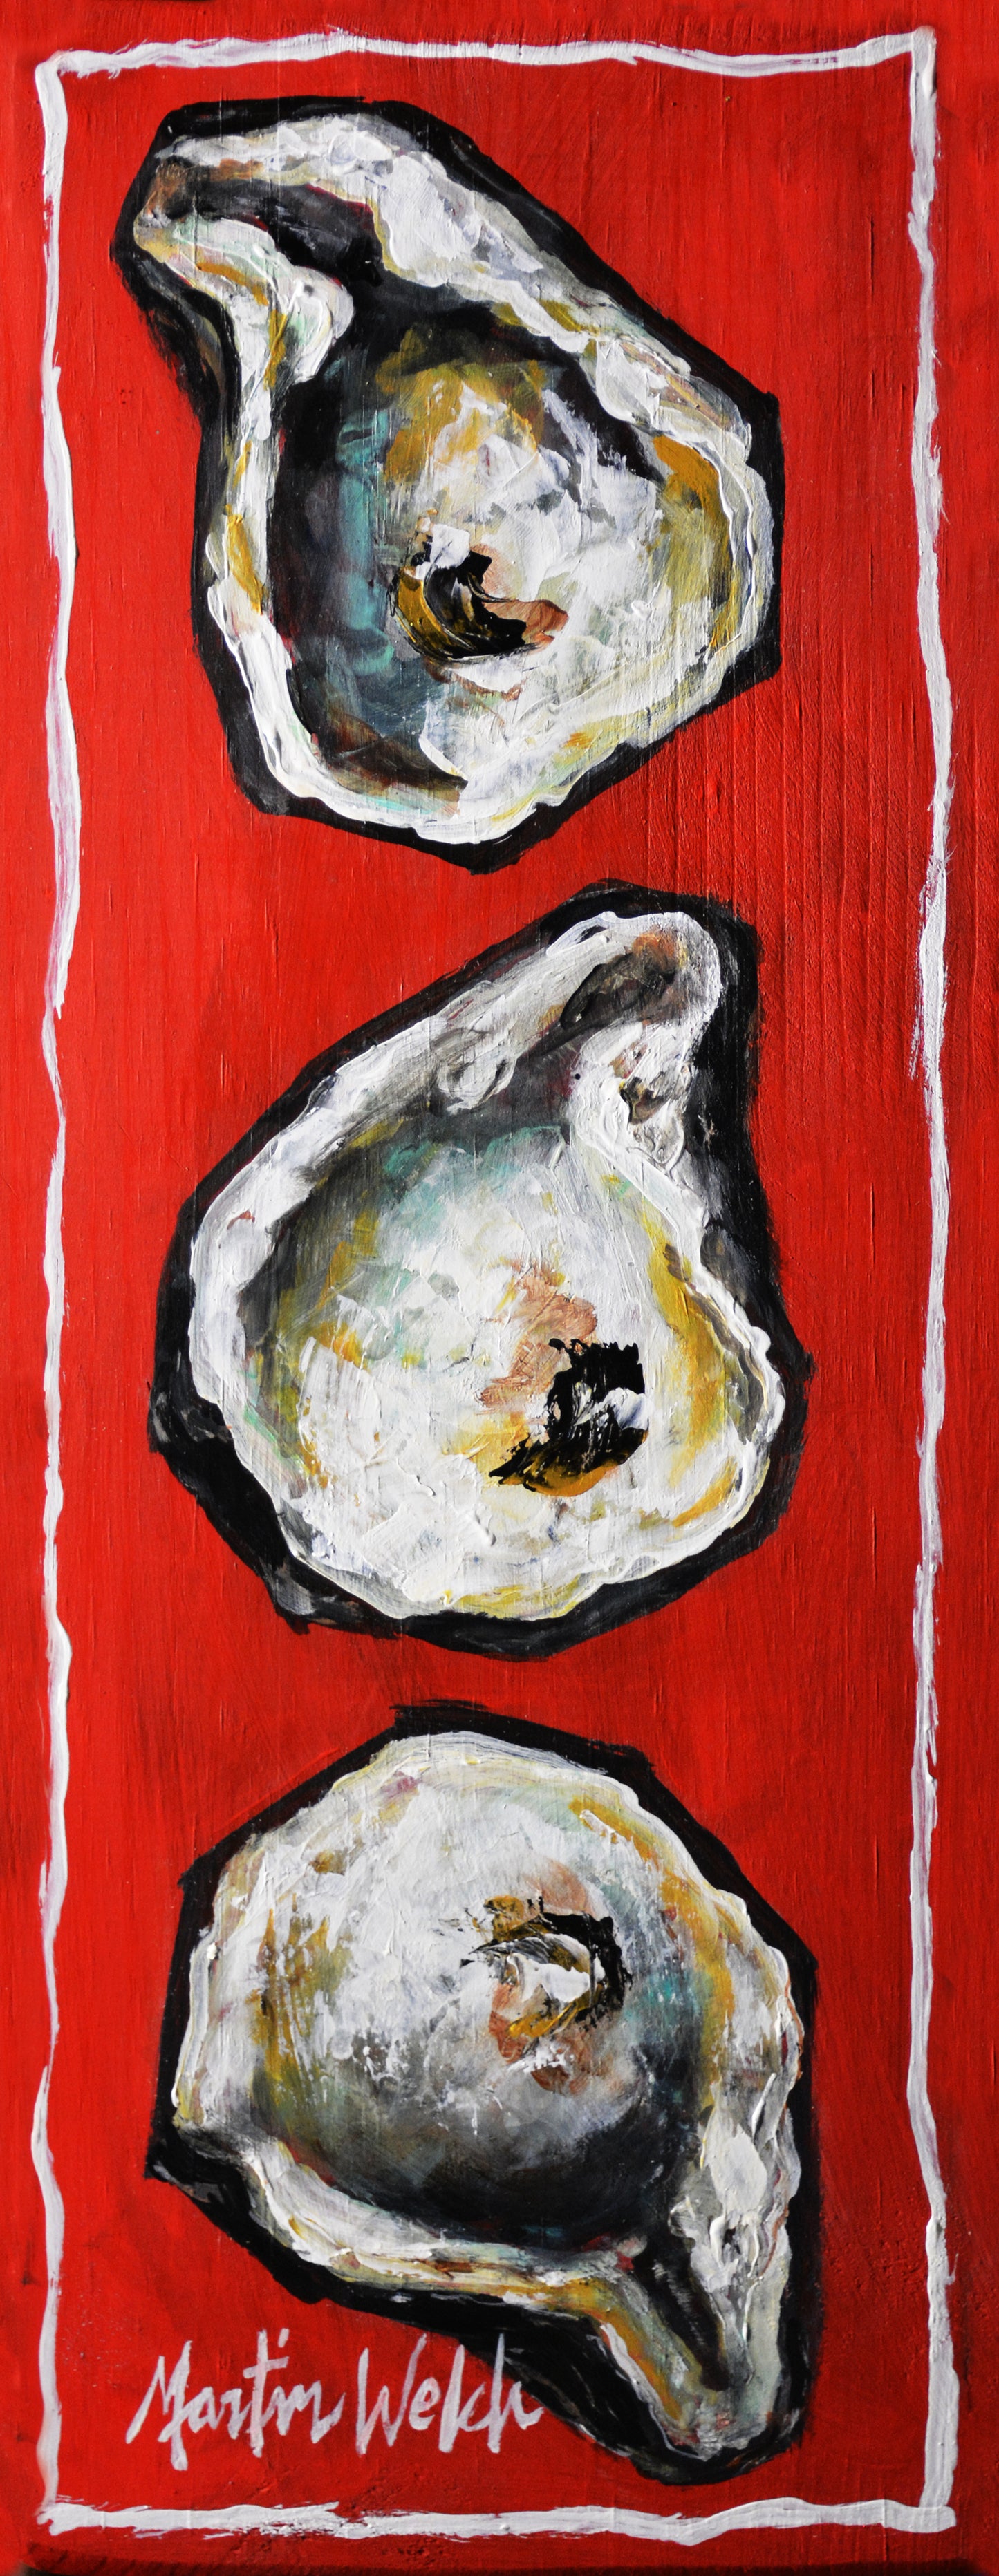 "Oysters on Red Board" 9.5x24 Original Painting of Oyster Shells